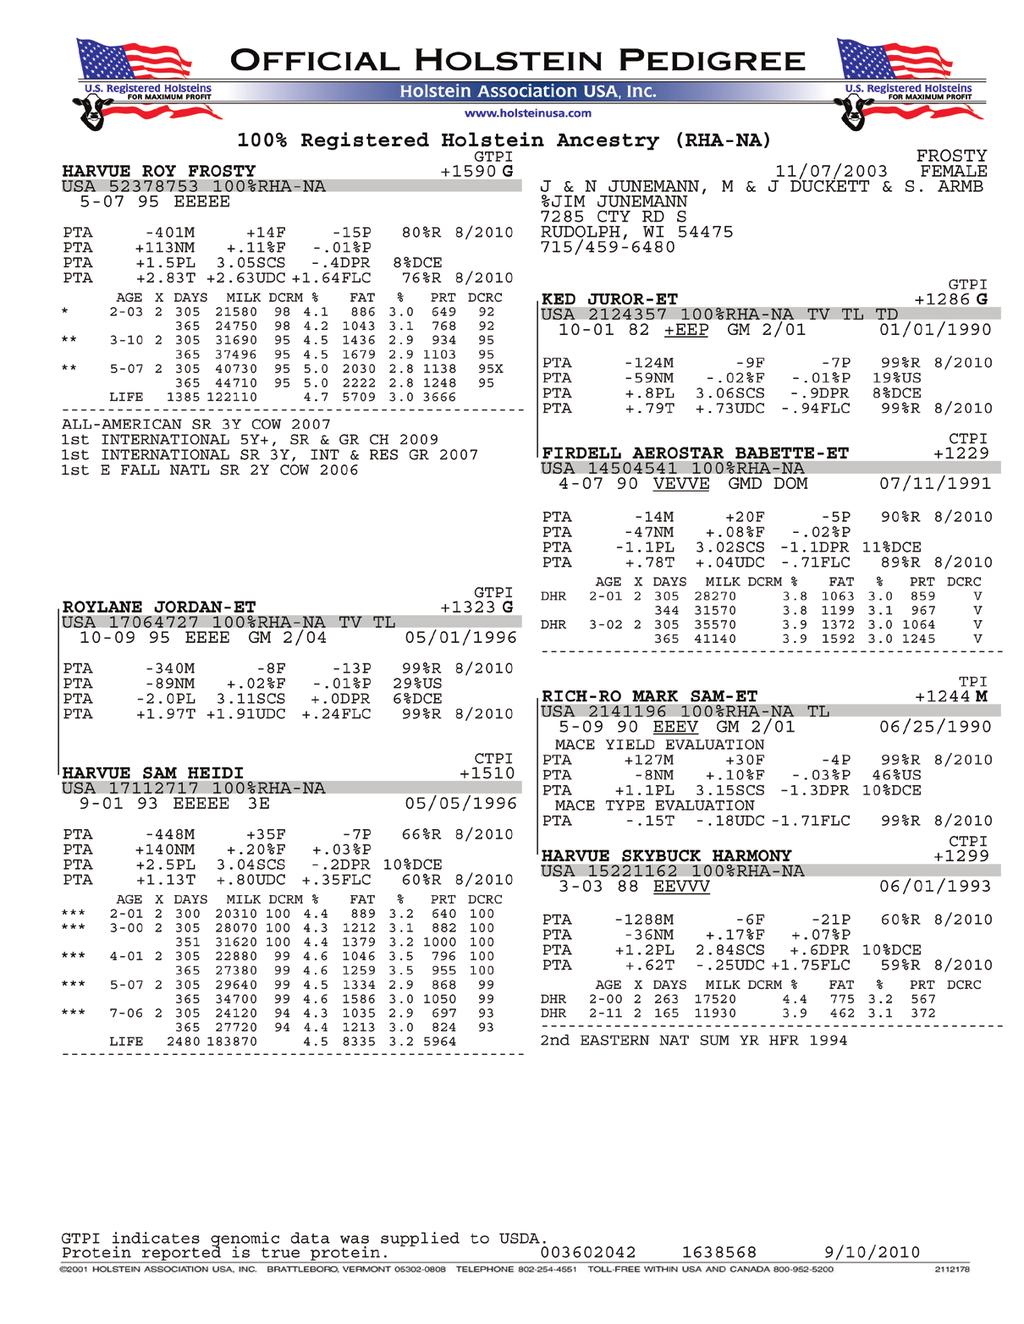 How to Read an Official Holstein Pedigree 5 3 4 6 7 5.